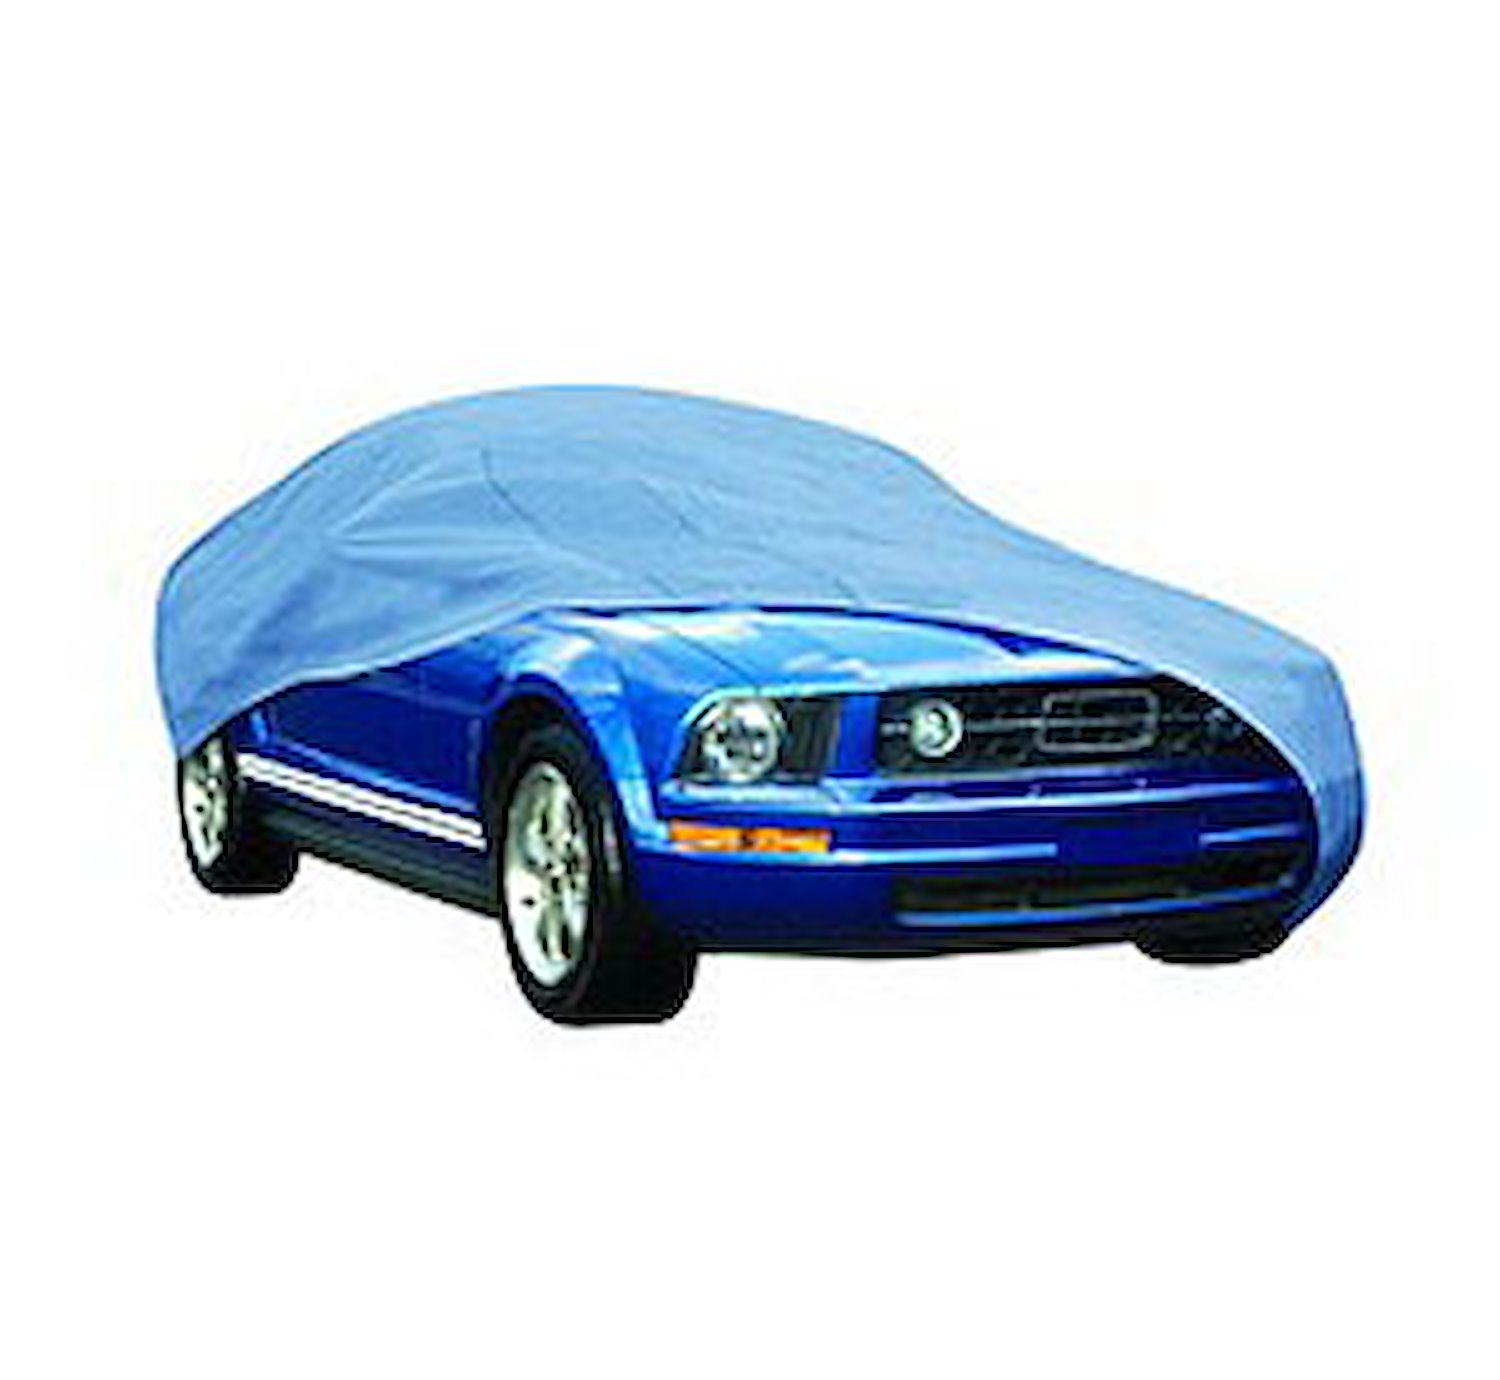 Duro Car Cover Fits Cars Up To 19" in Length